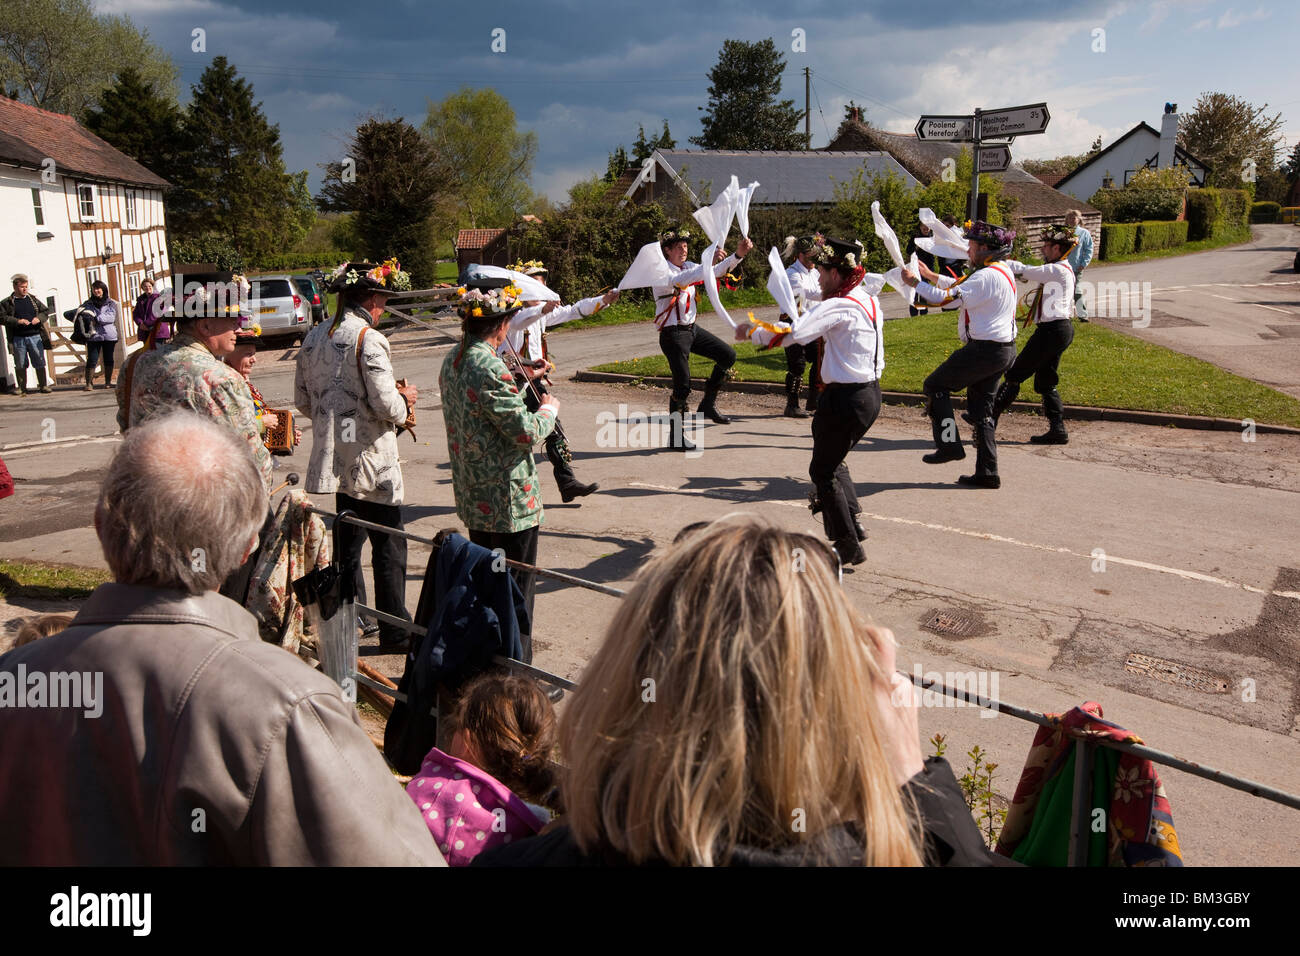 UK, England, Herefordshire, Putley, Big Apple Event, Morris men dancing on village green as rain storm approaches Stock Photo